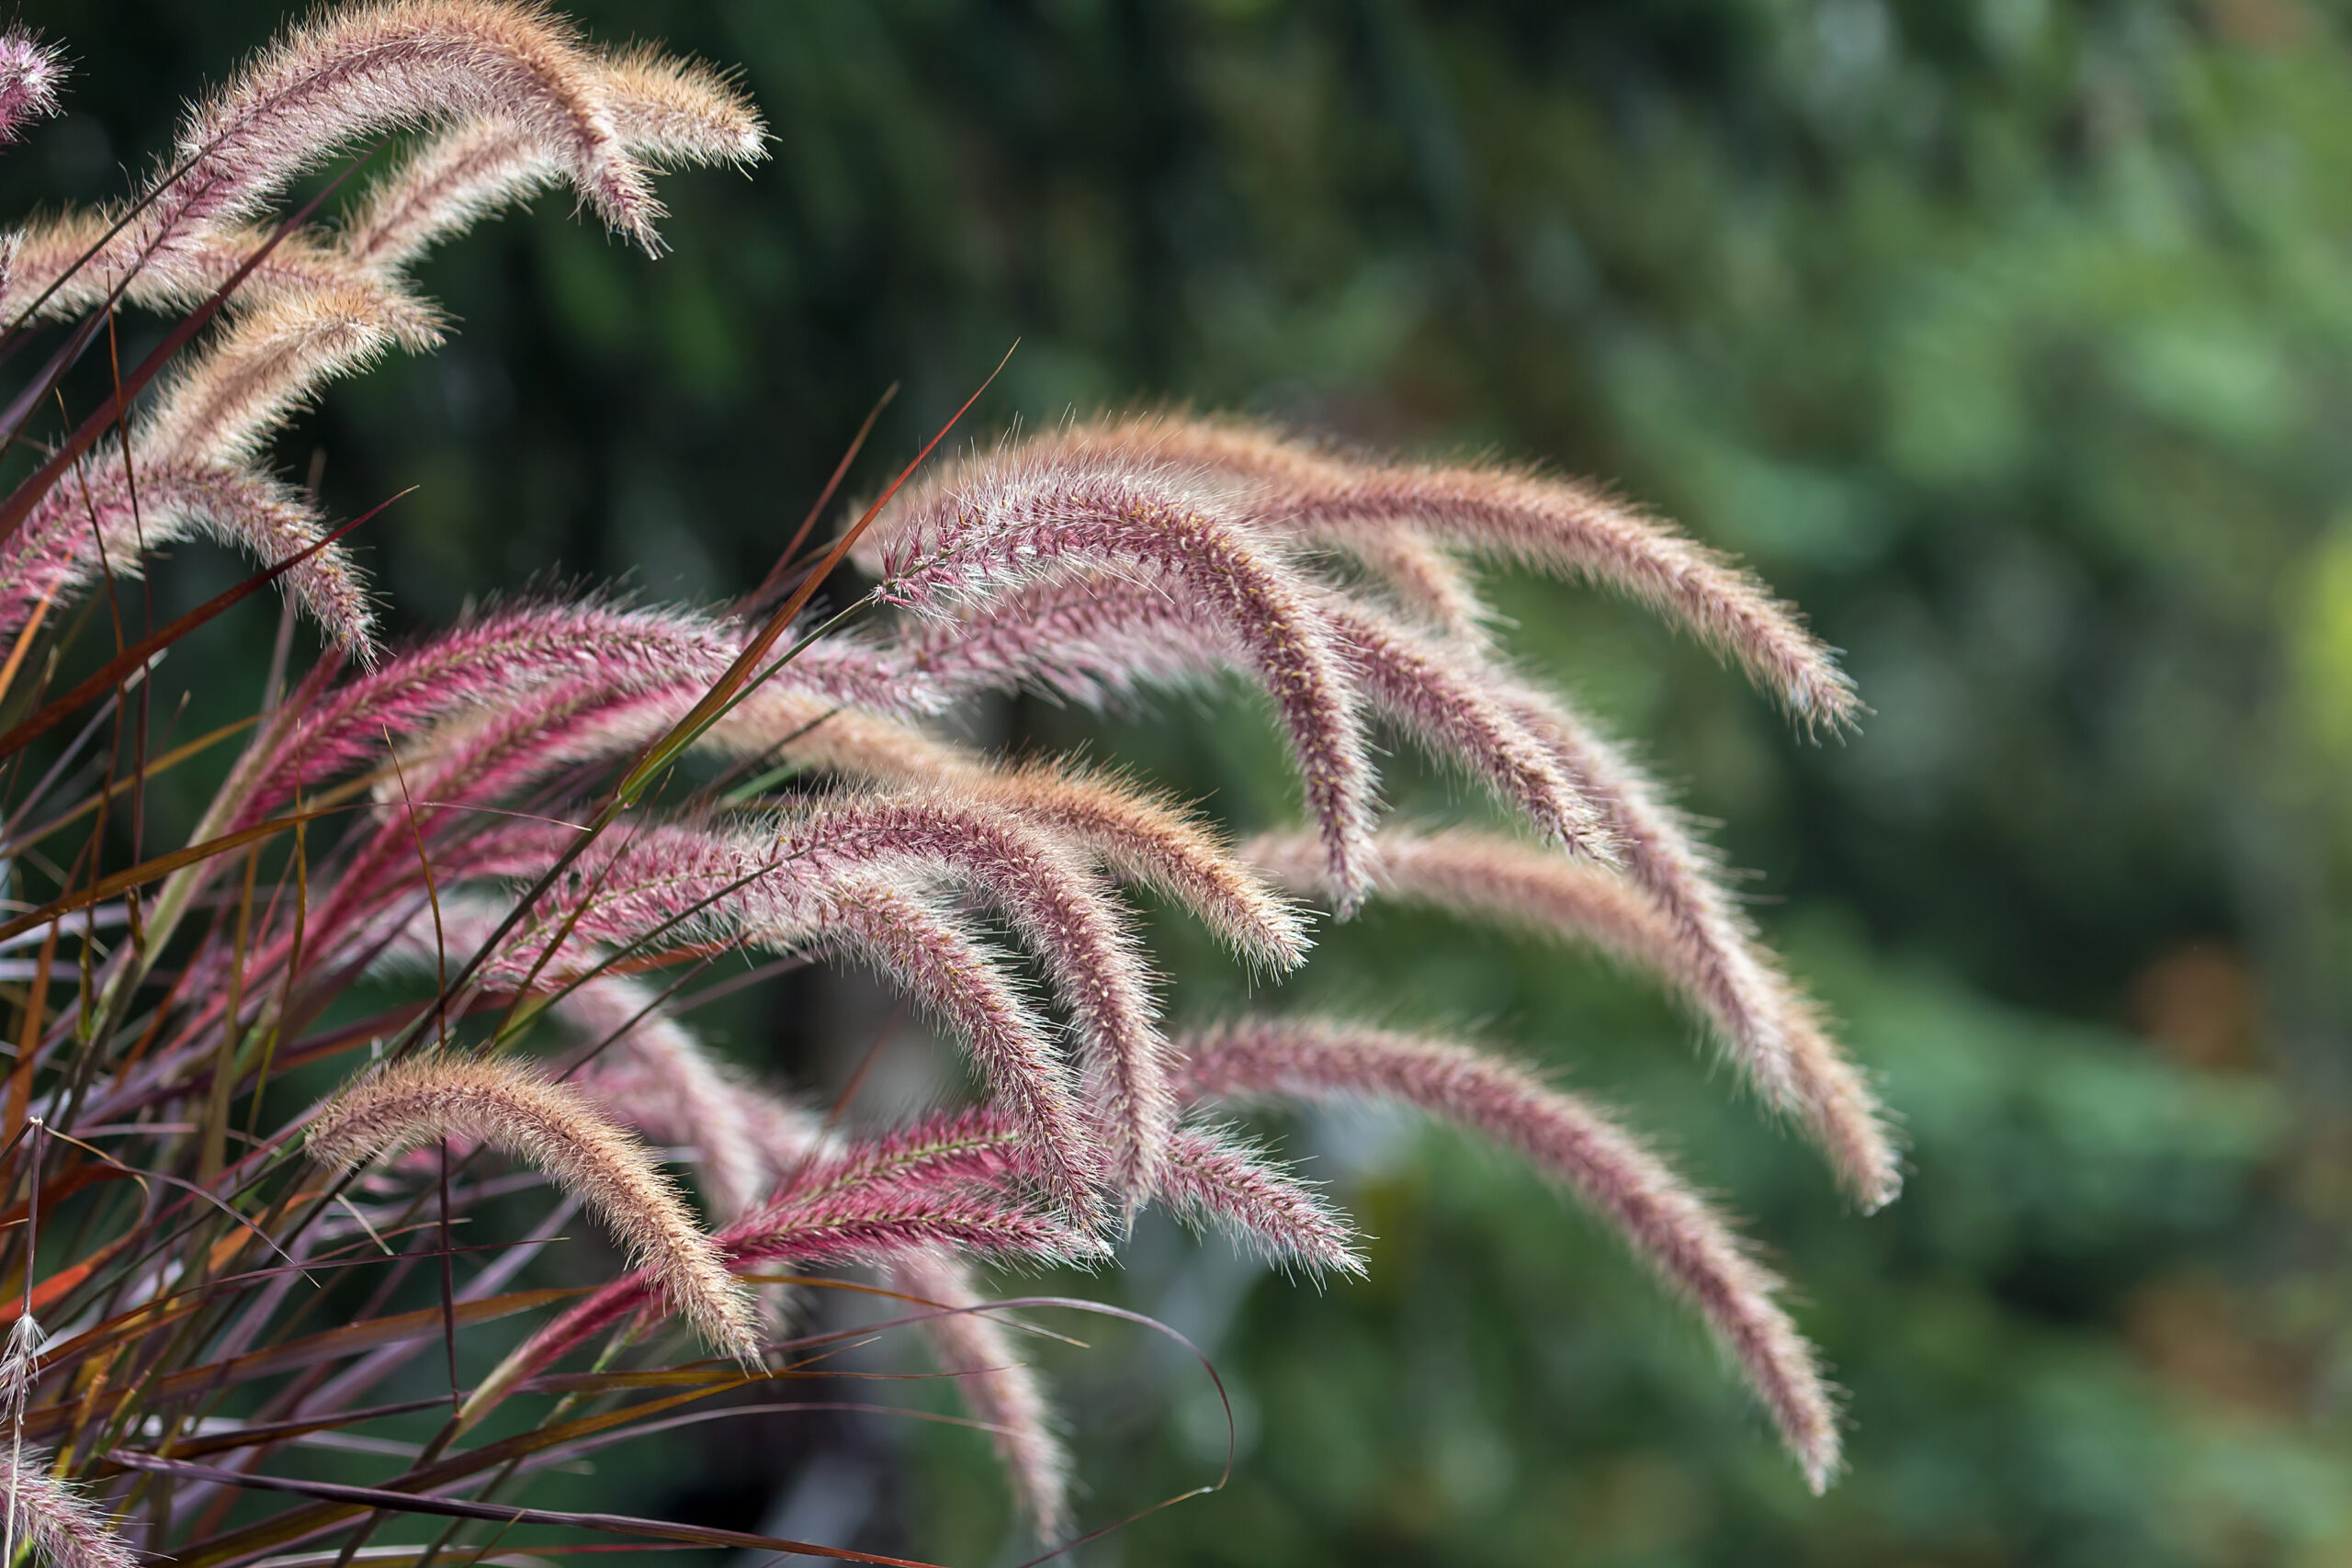 Graceful ornamental grass with pinkish plumes swaying in the breeze, with a blurred green background for contrast.